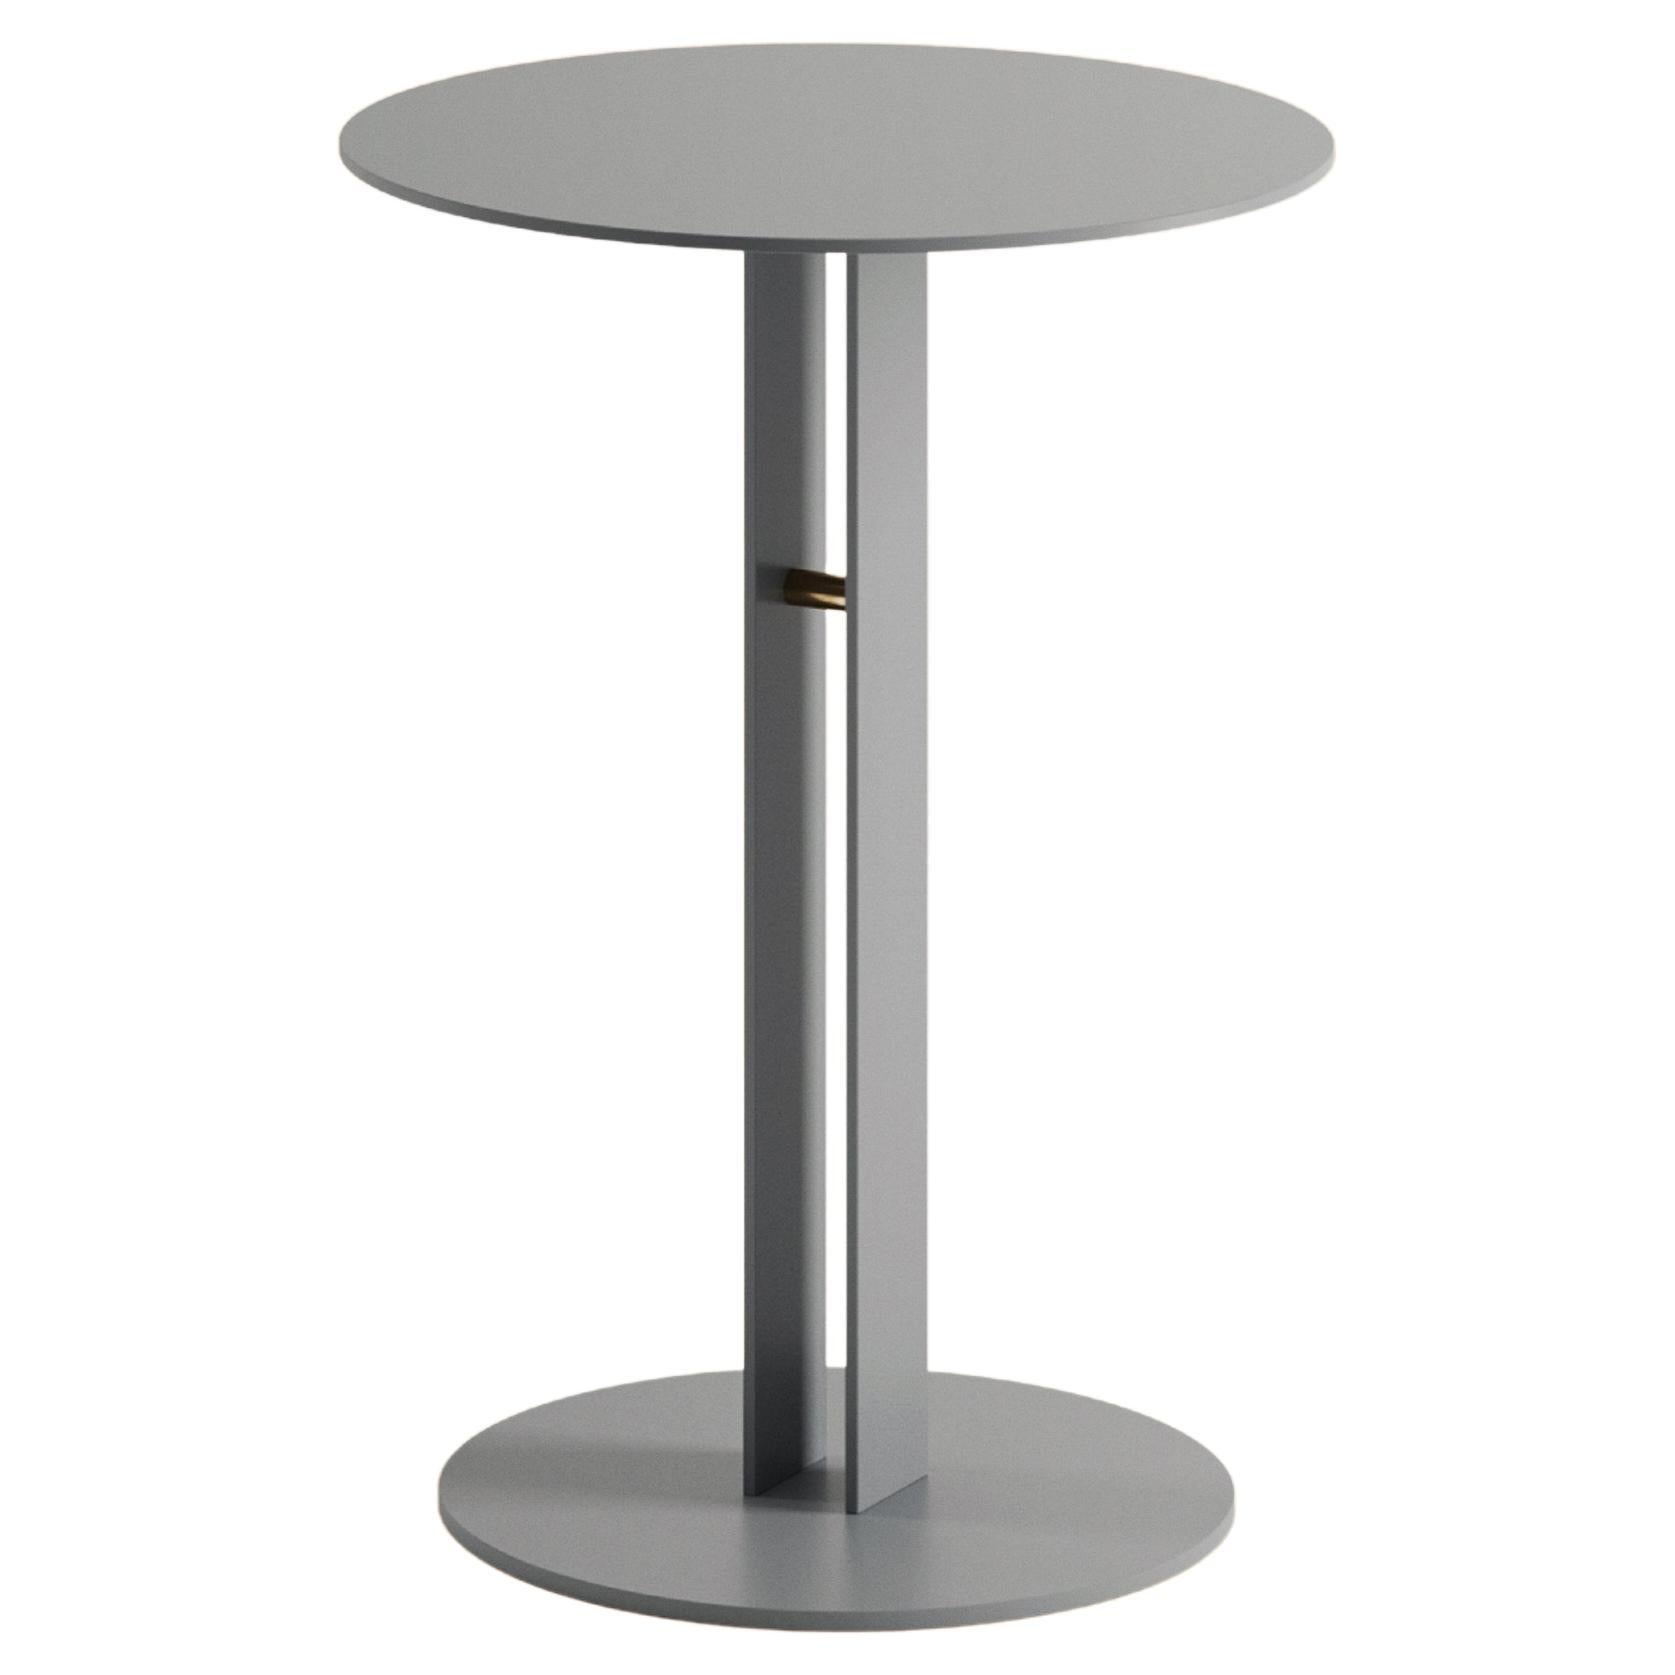 Medium Grey Portman Side Table in Steel with Brass Designed by Master for Lemon For Sale